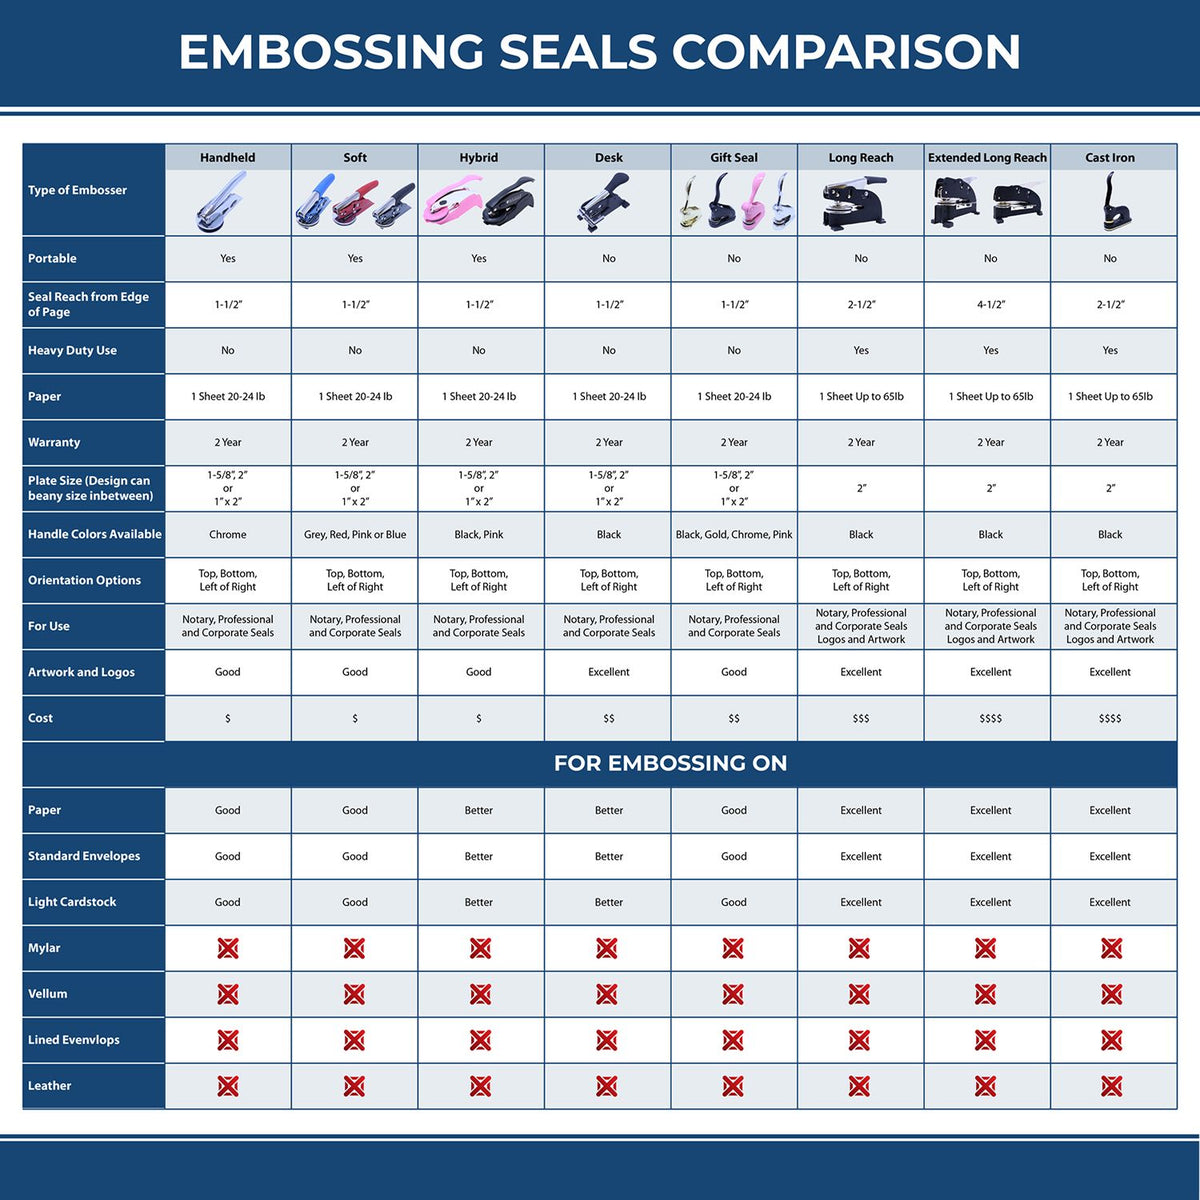 A comparison chart for the different types of mount models available for the State of Georgia Architectural Seal Embosser.